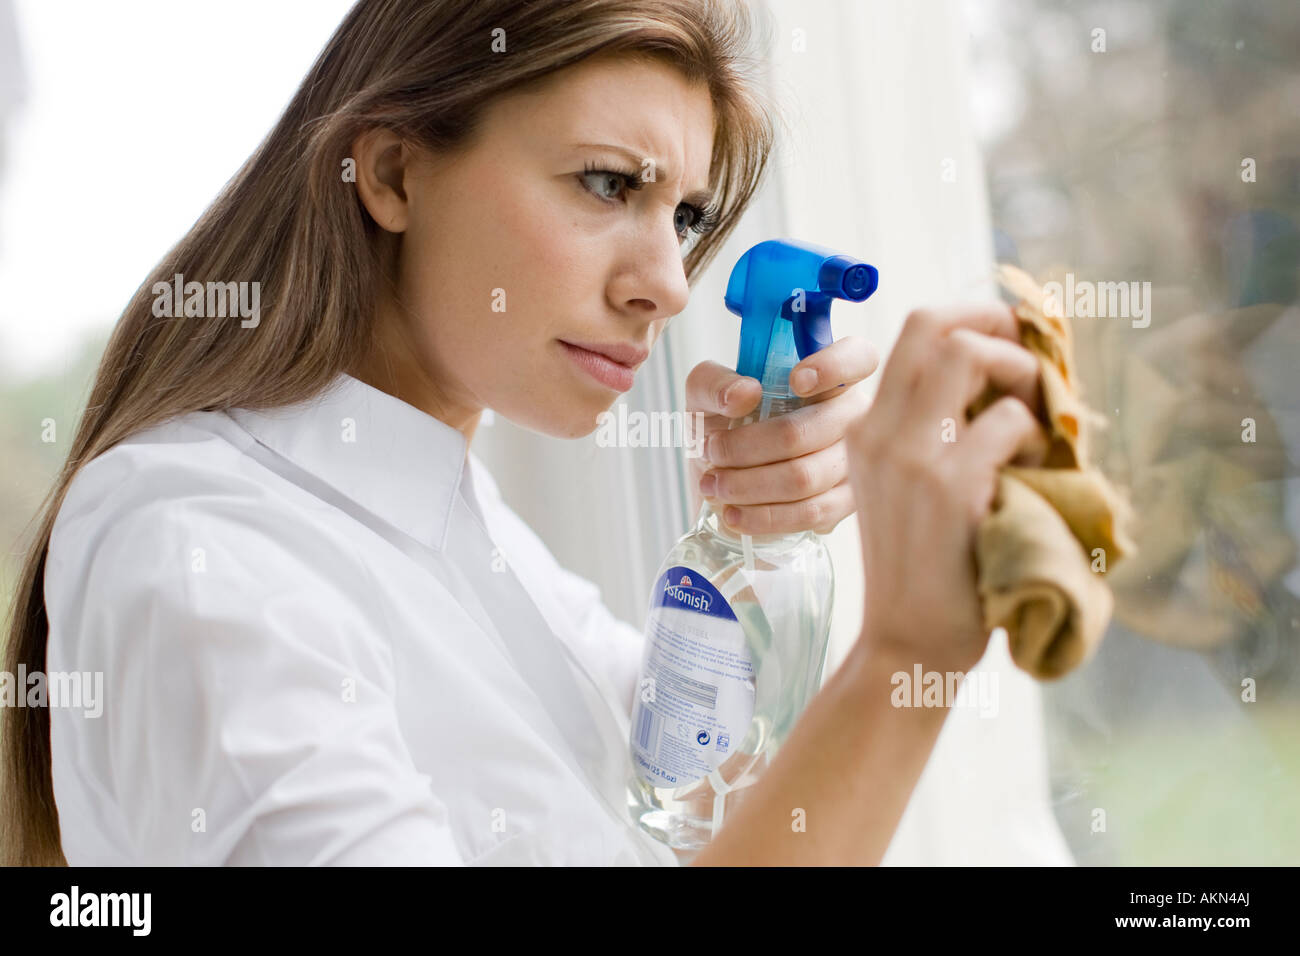 Woman cleaning window Stock Photo